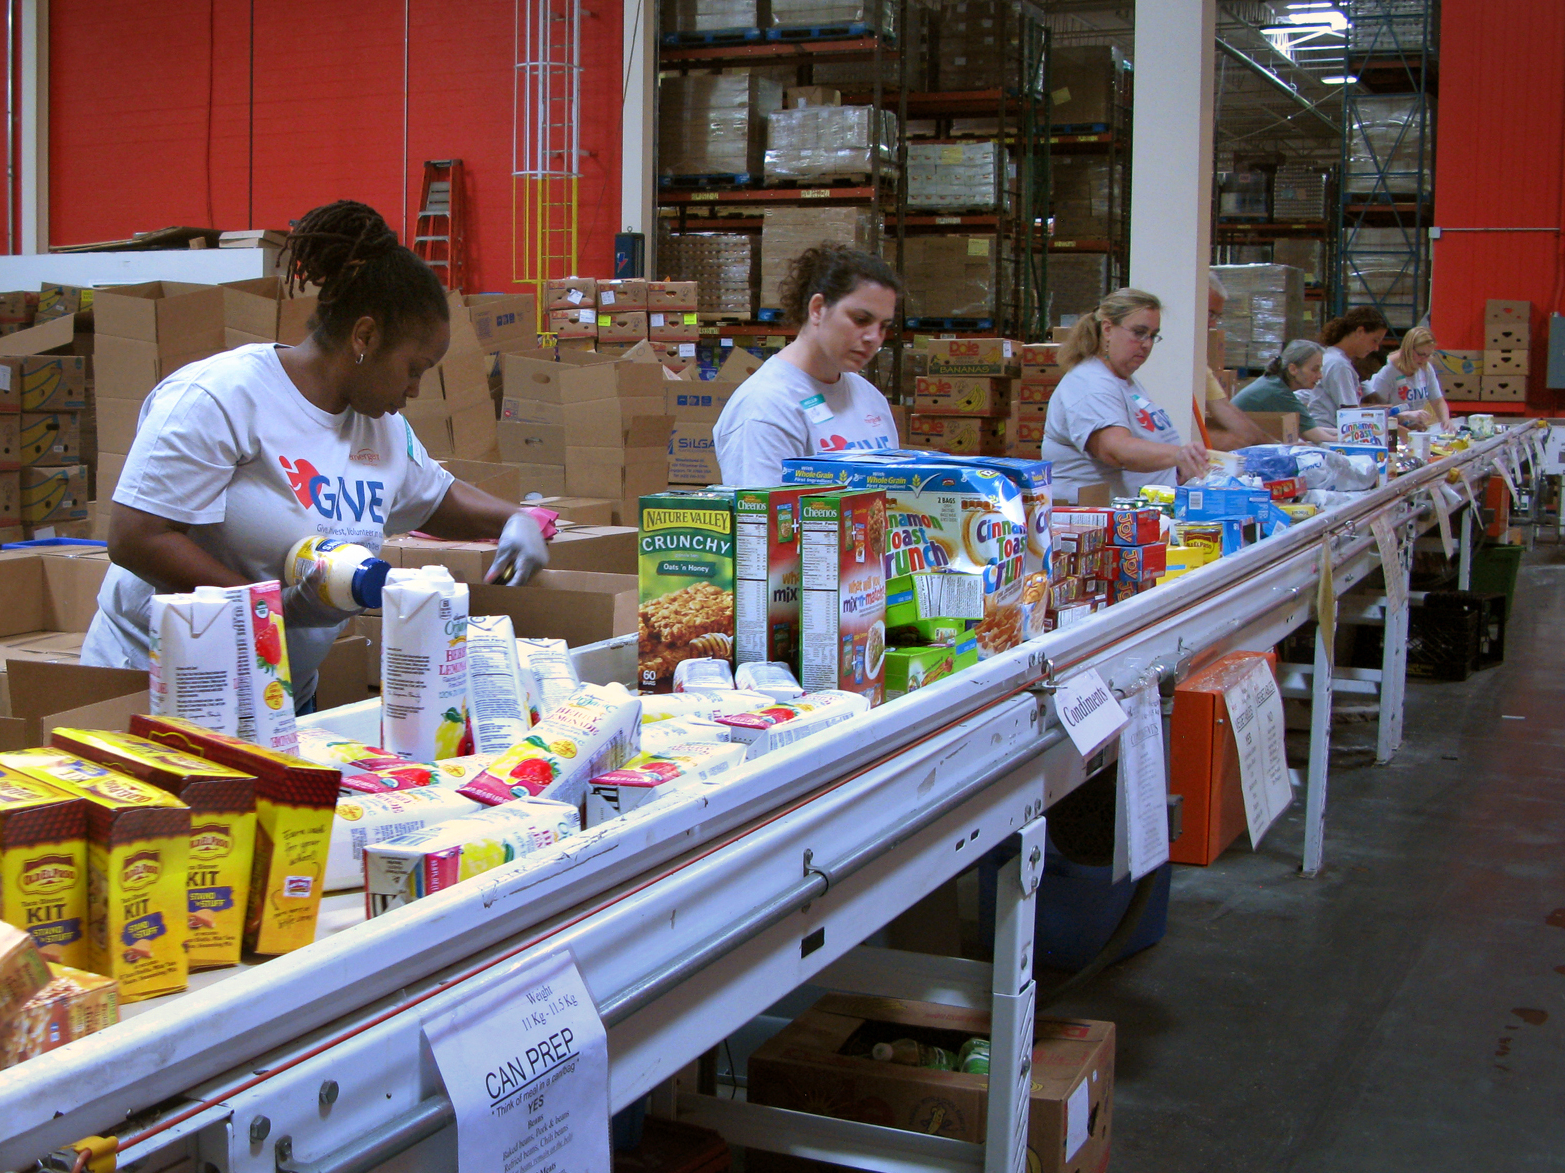 Volunteers at the Maryland Food Bank in Baltimore sort and box food donations on a conveyor belt. The bank started working with groups like the USO in 2013 to provide food aid to families affiliated with nearby military bases. Photo: Pam Fessler/NPR 